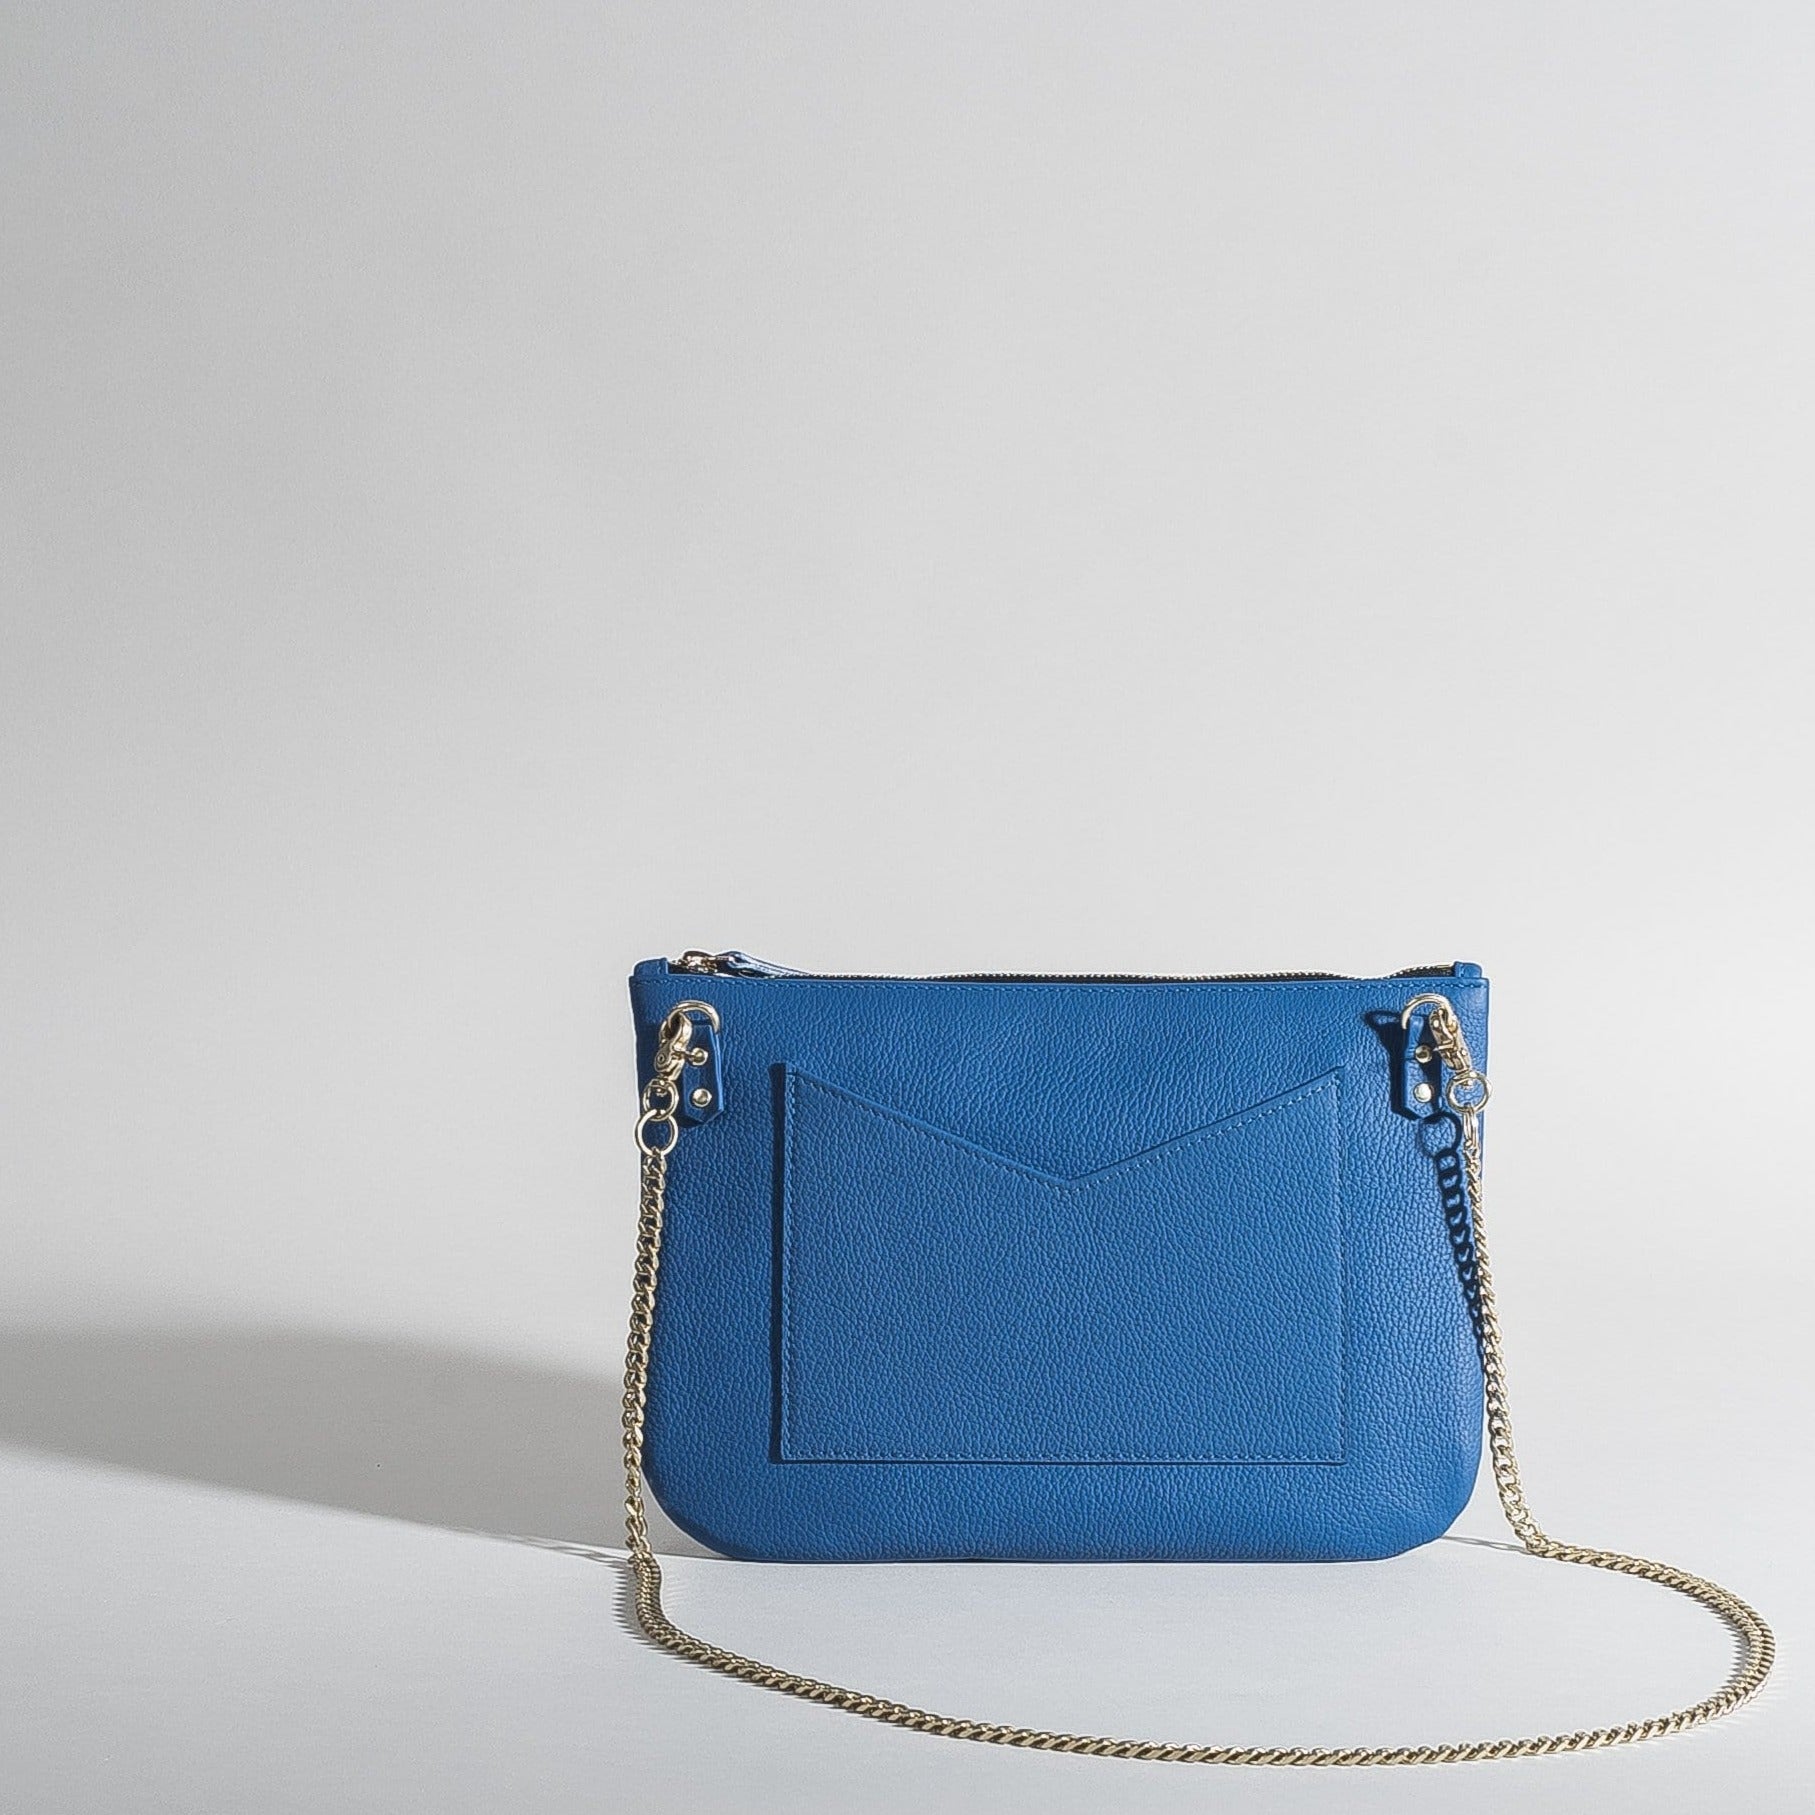 Beautiful, Functional Handbags designed to empower your life